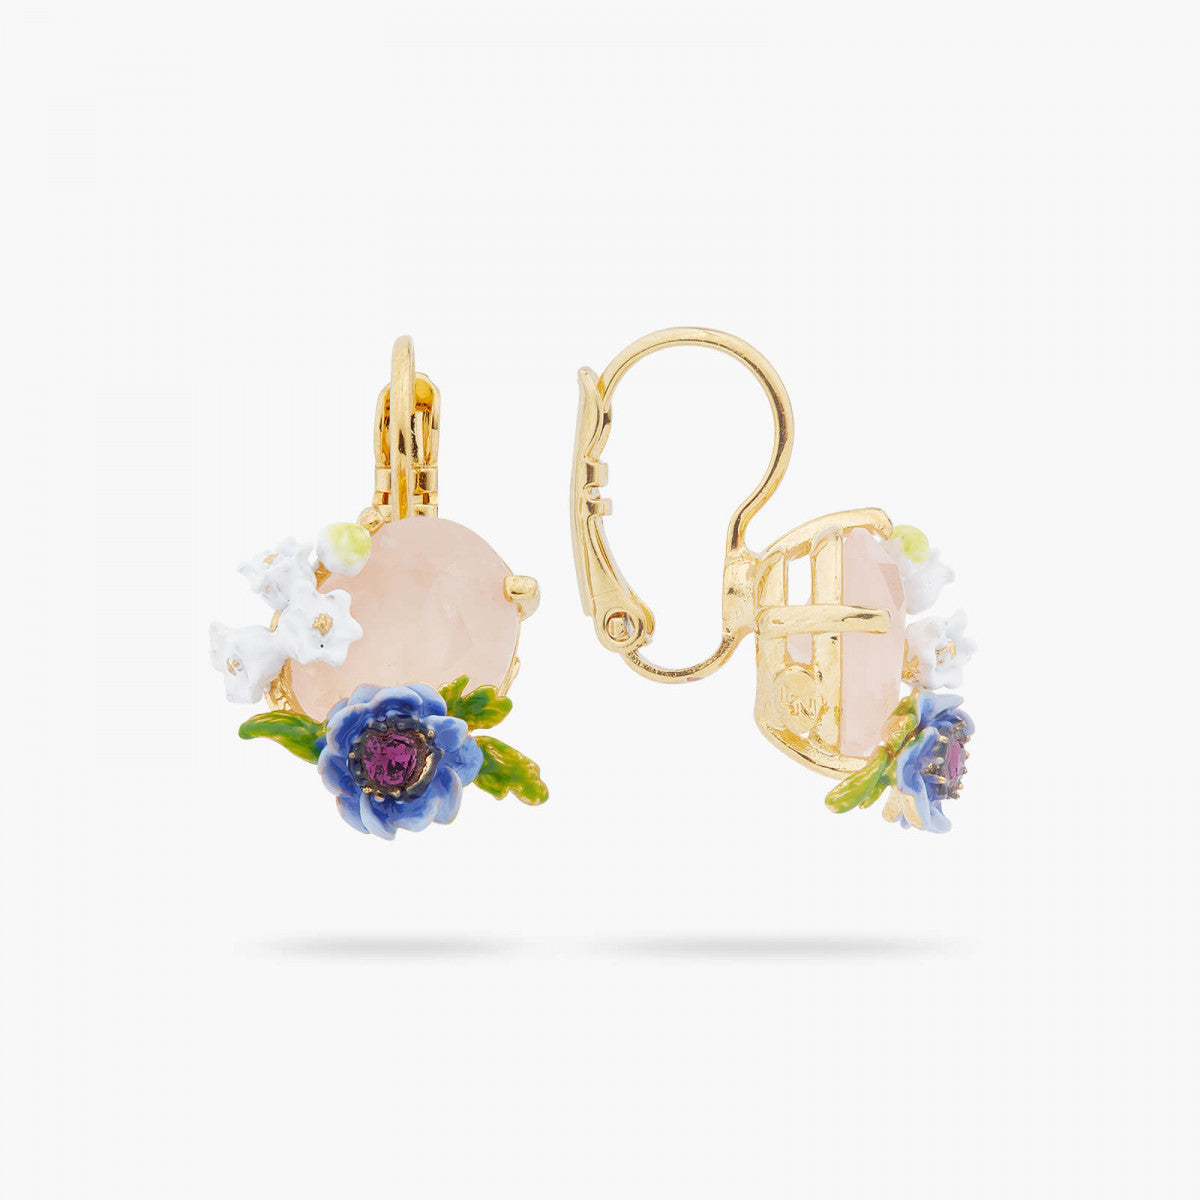 ROSE QUARTZ AND FLORAL COMPOSITION SLEEPER EARRINGS